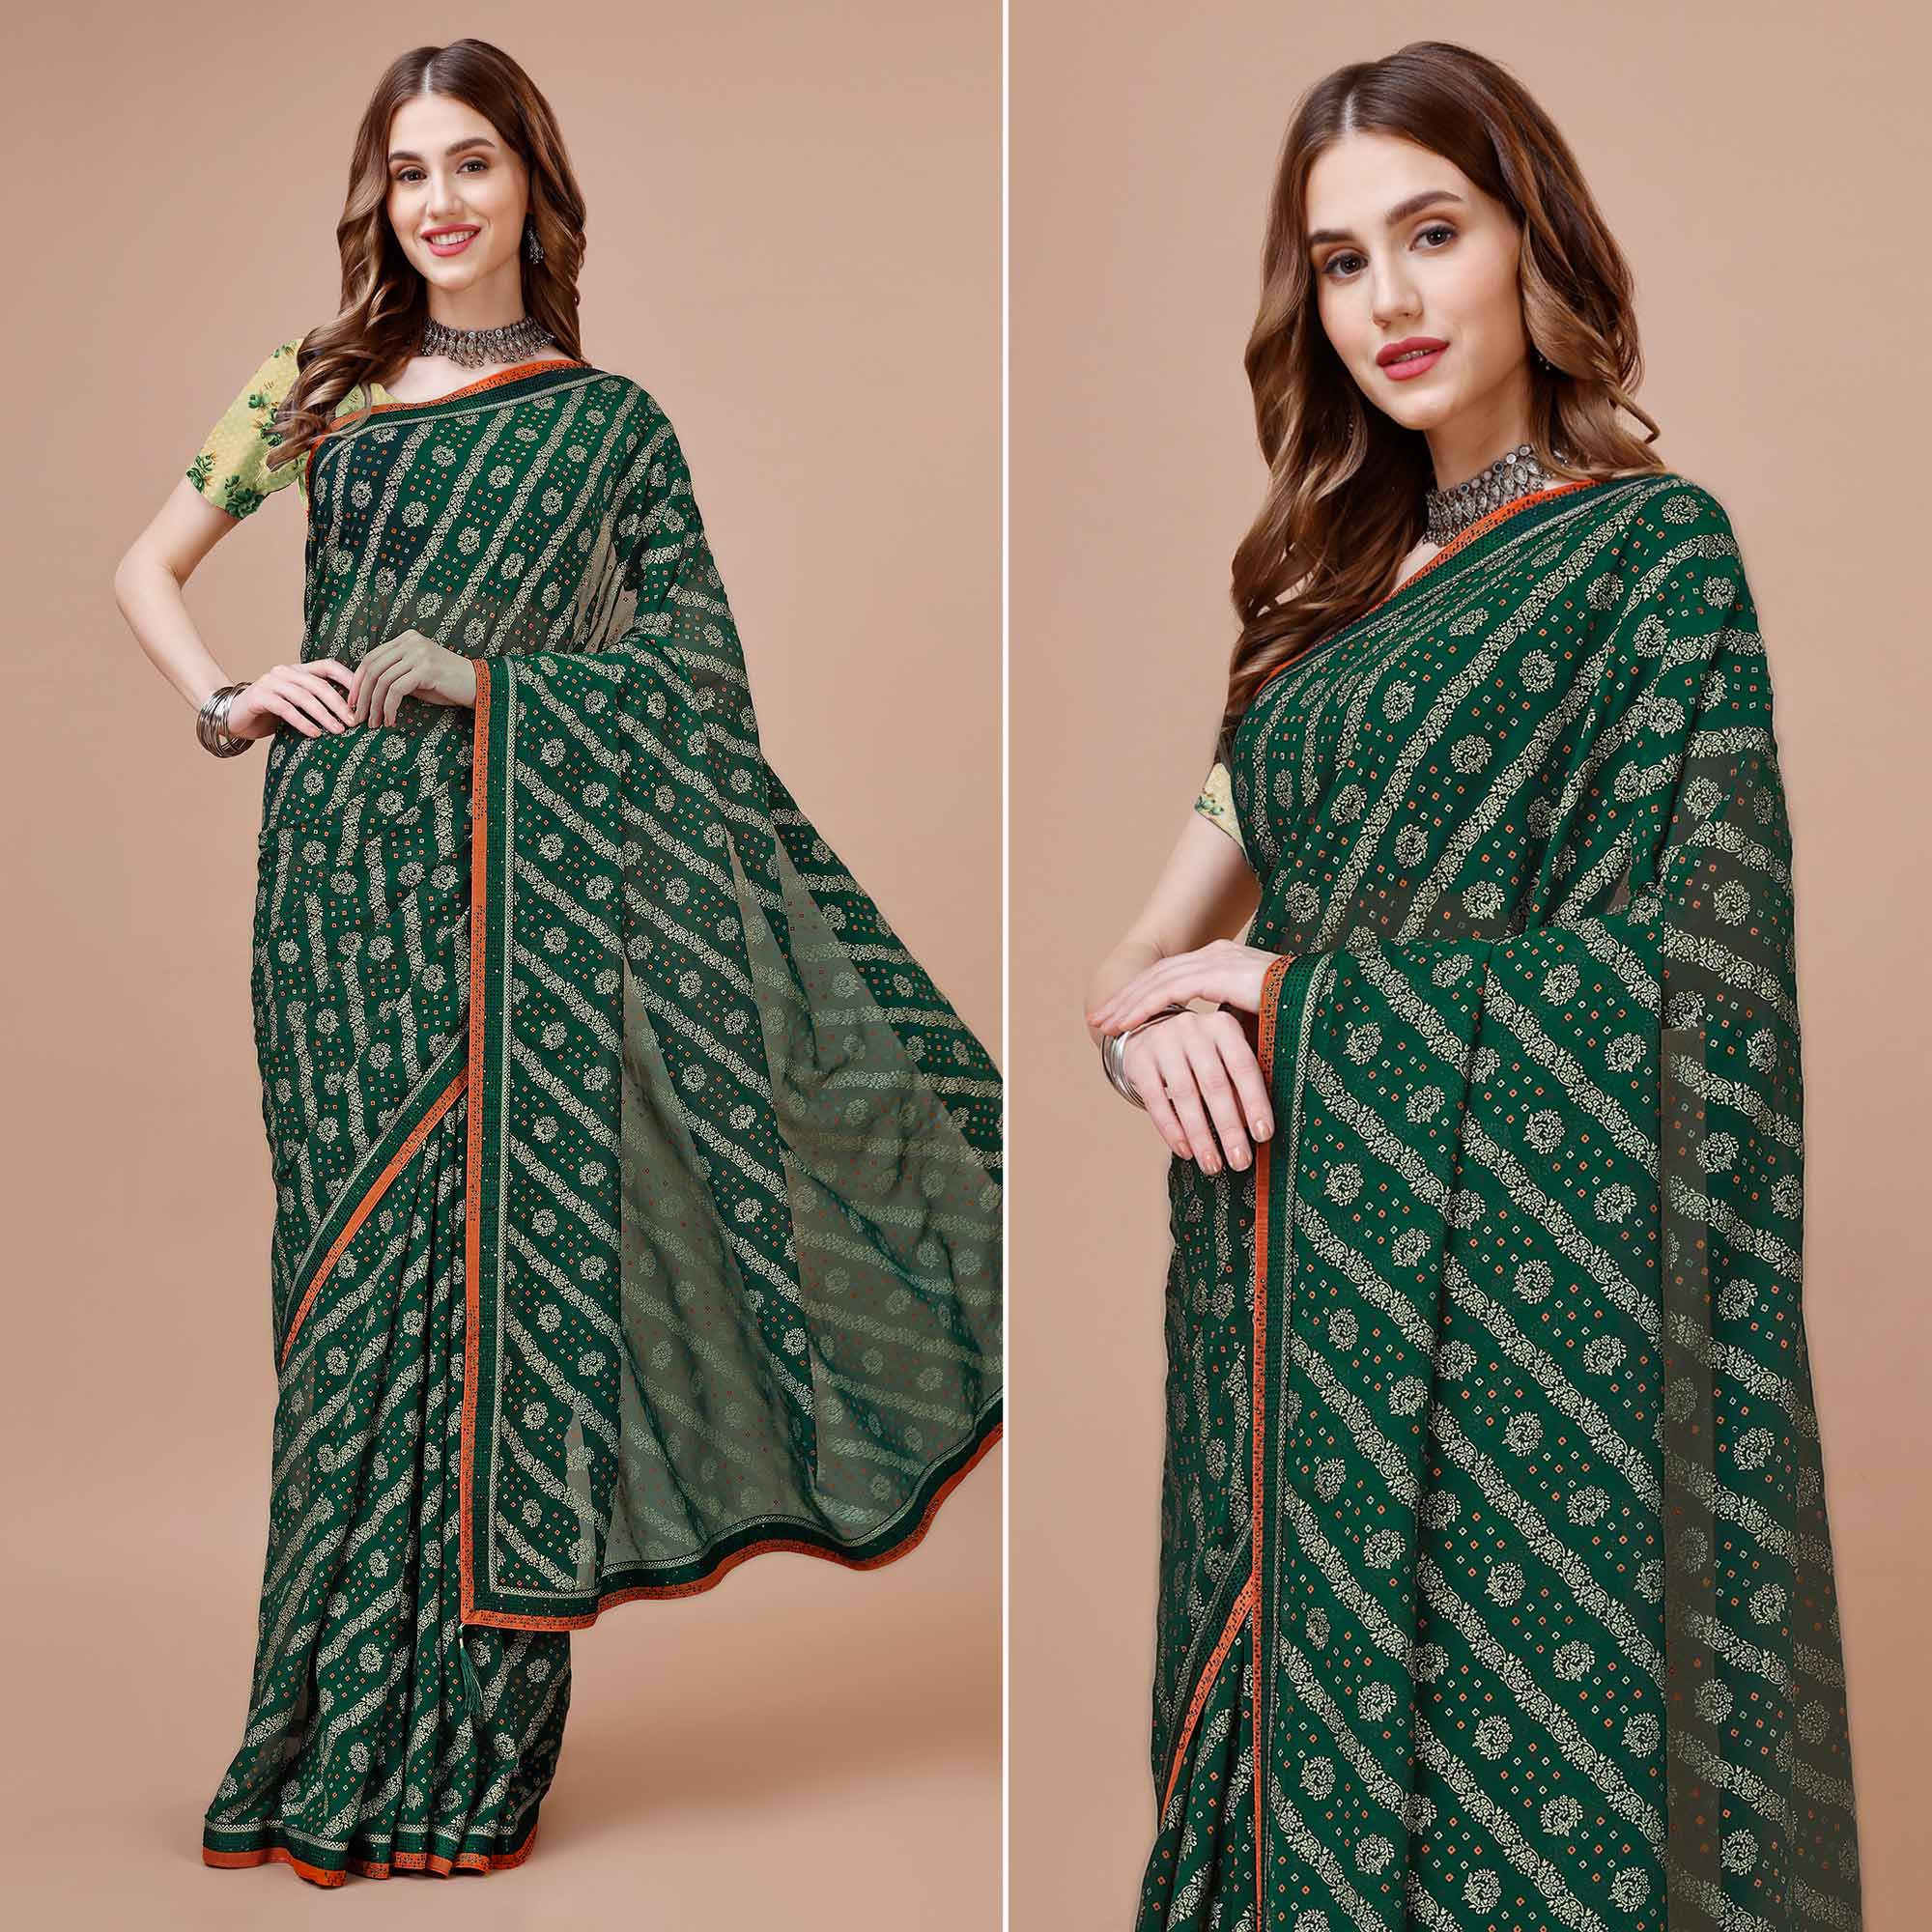 Green Floral Foil Printed Chiffon Saree With Lace Border